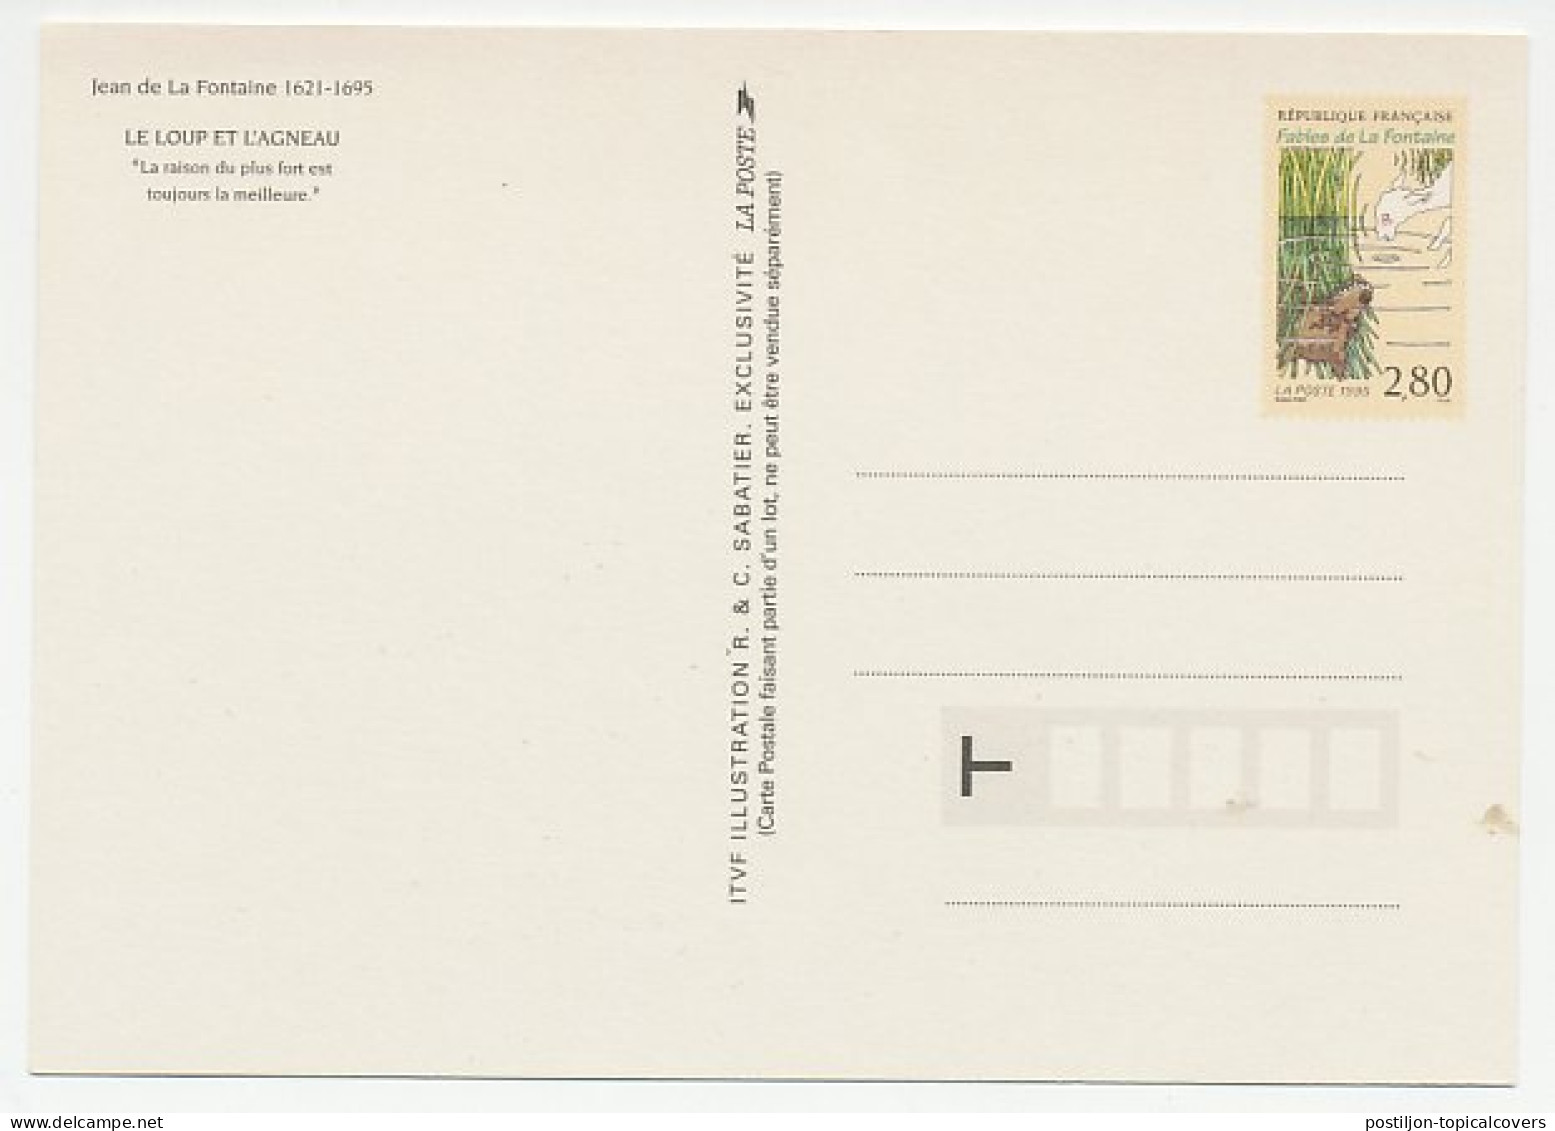 Postal Stationery France 1995 Jean De La Fontaine - The Wolf And The Lamb - Fairy Tales, Popular Stories & Legends